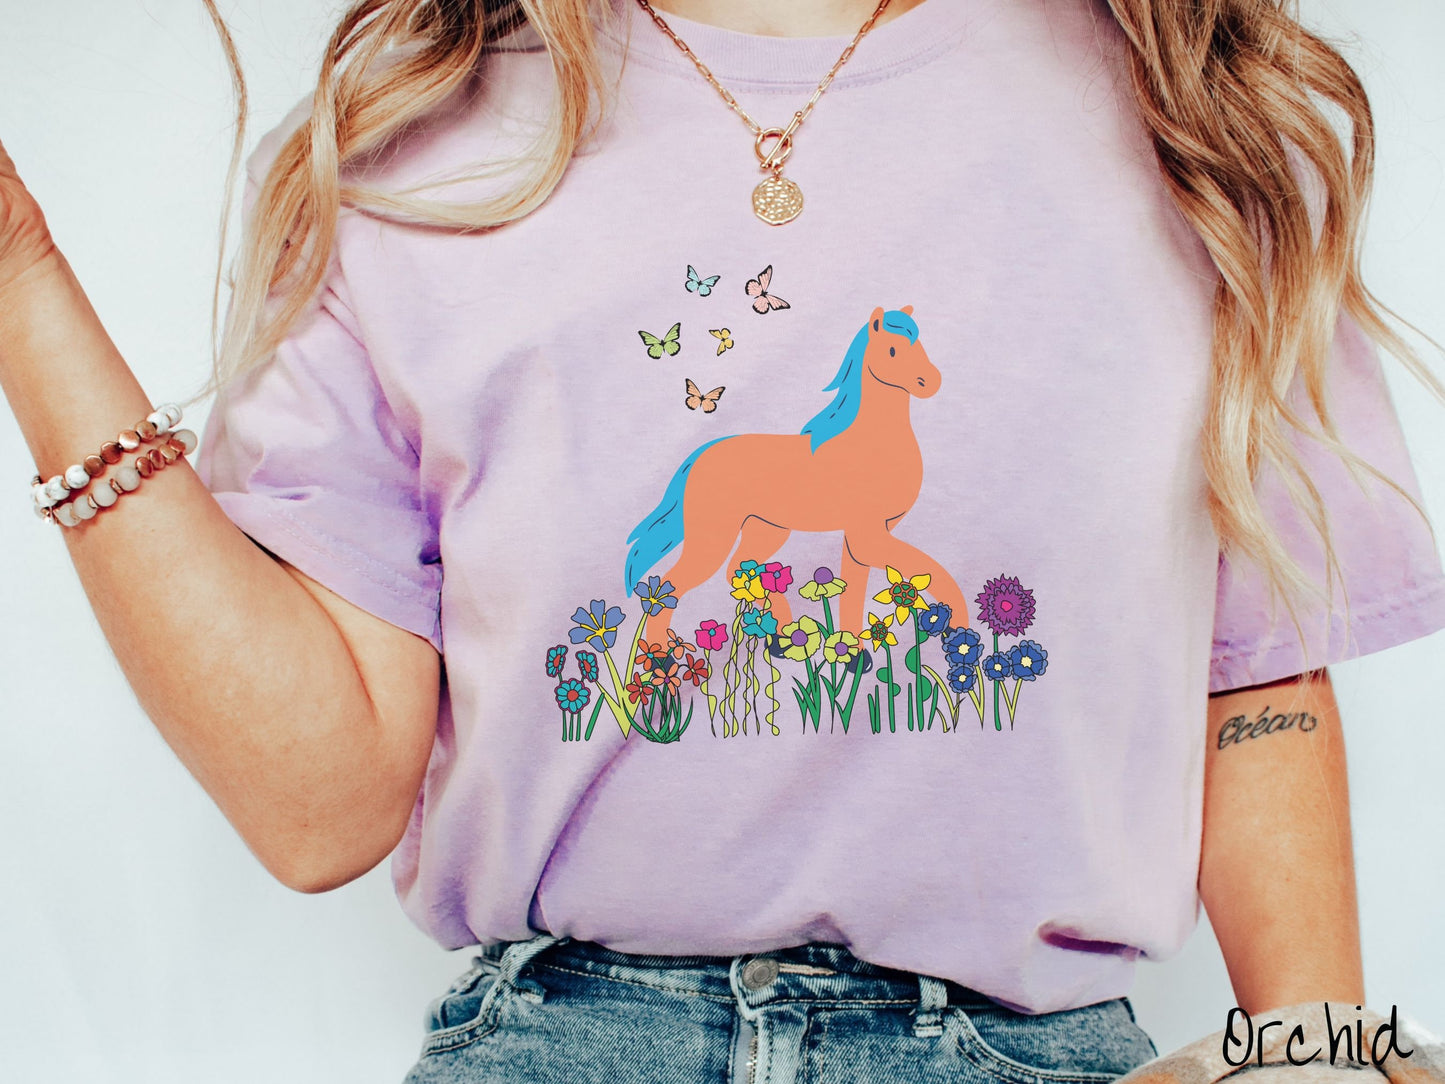 A woman wearing a cute, vintage orchid colored Comfort Colors shirt with a brown horse with blue hair walking through a field of colorful flowers and grass. There are colorful butterflies flying above the horse.